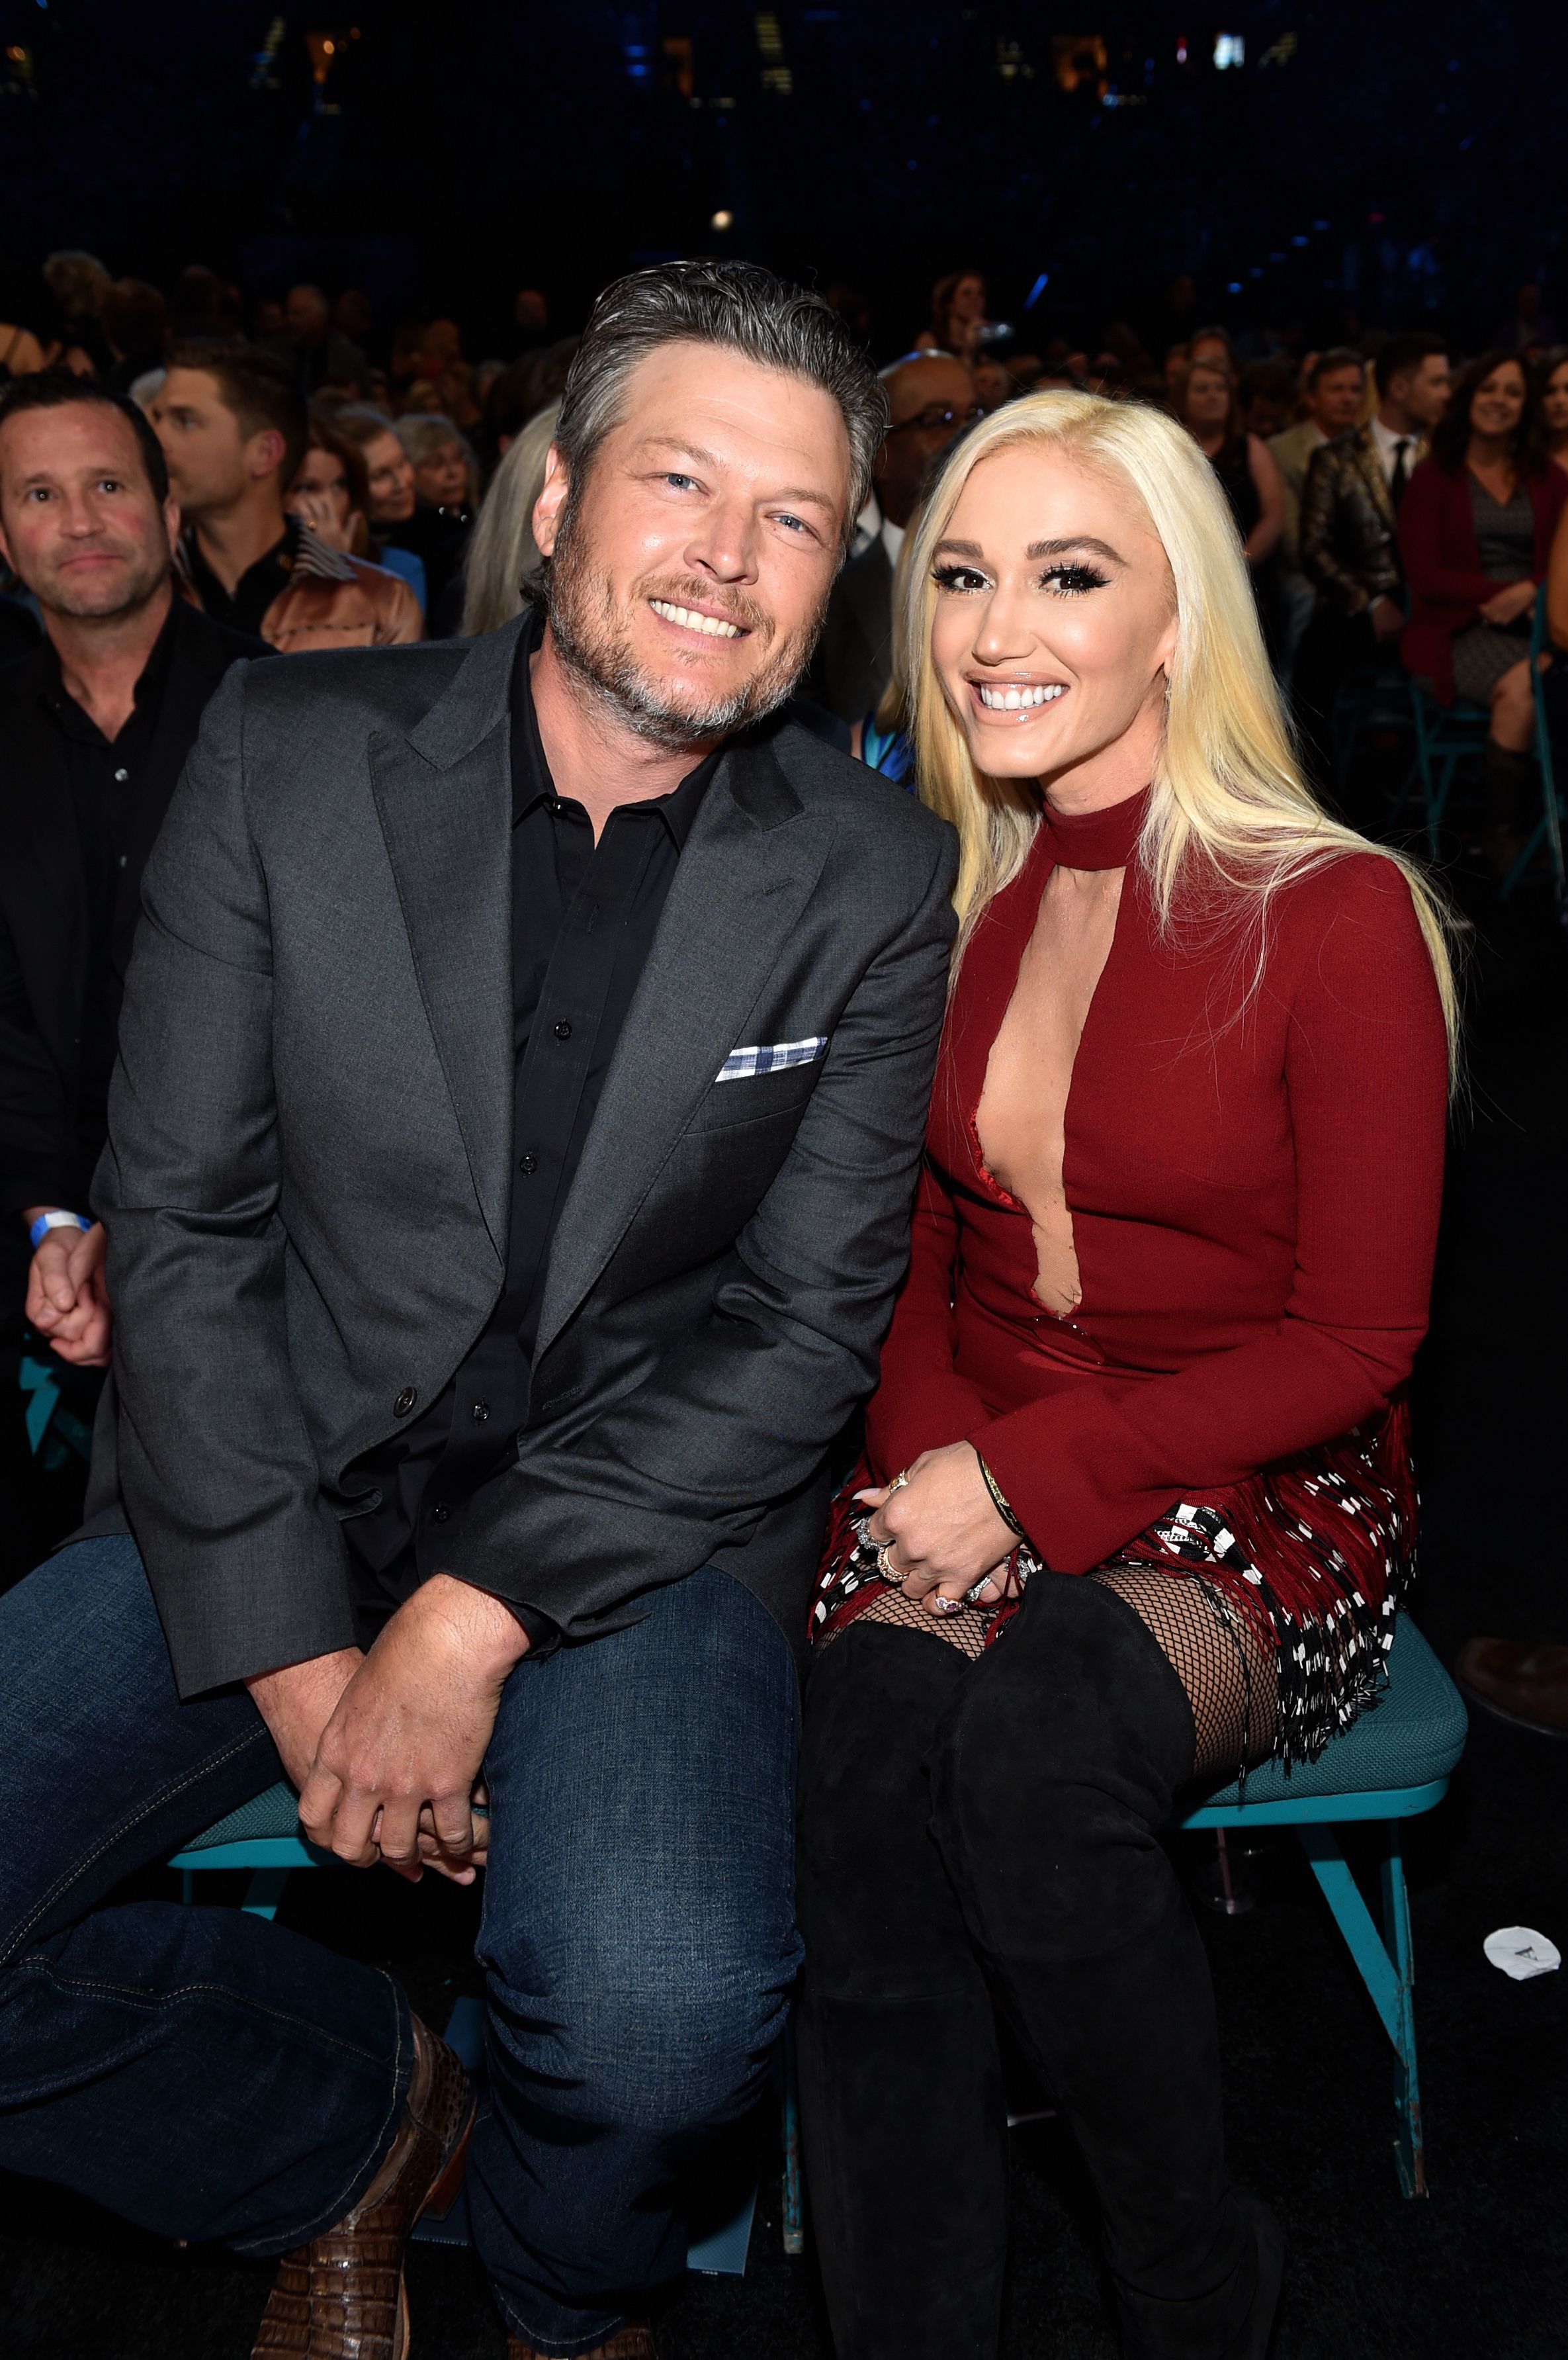 Blake Shelton and Gwen Stefani at the 53rd Academy of Country Music Awards at MGM Grand Garden Arena on April 15, 2018 | Photo: Getty Images